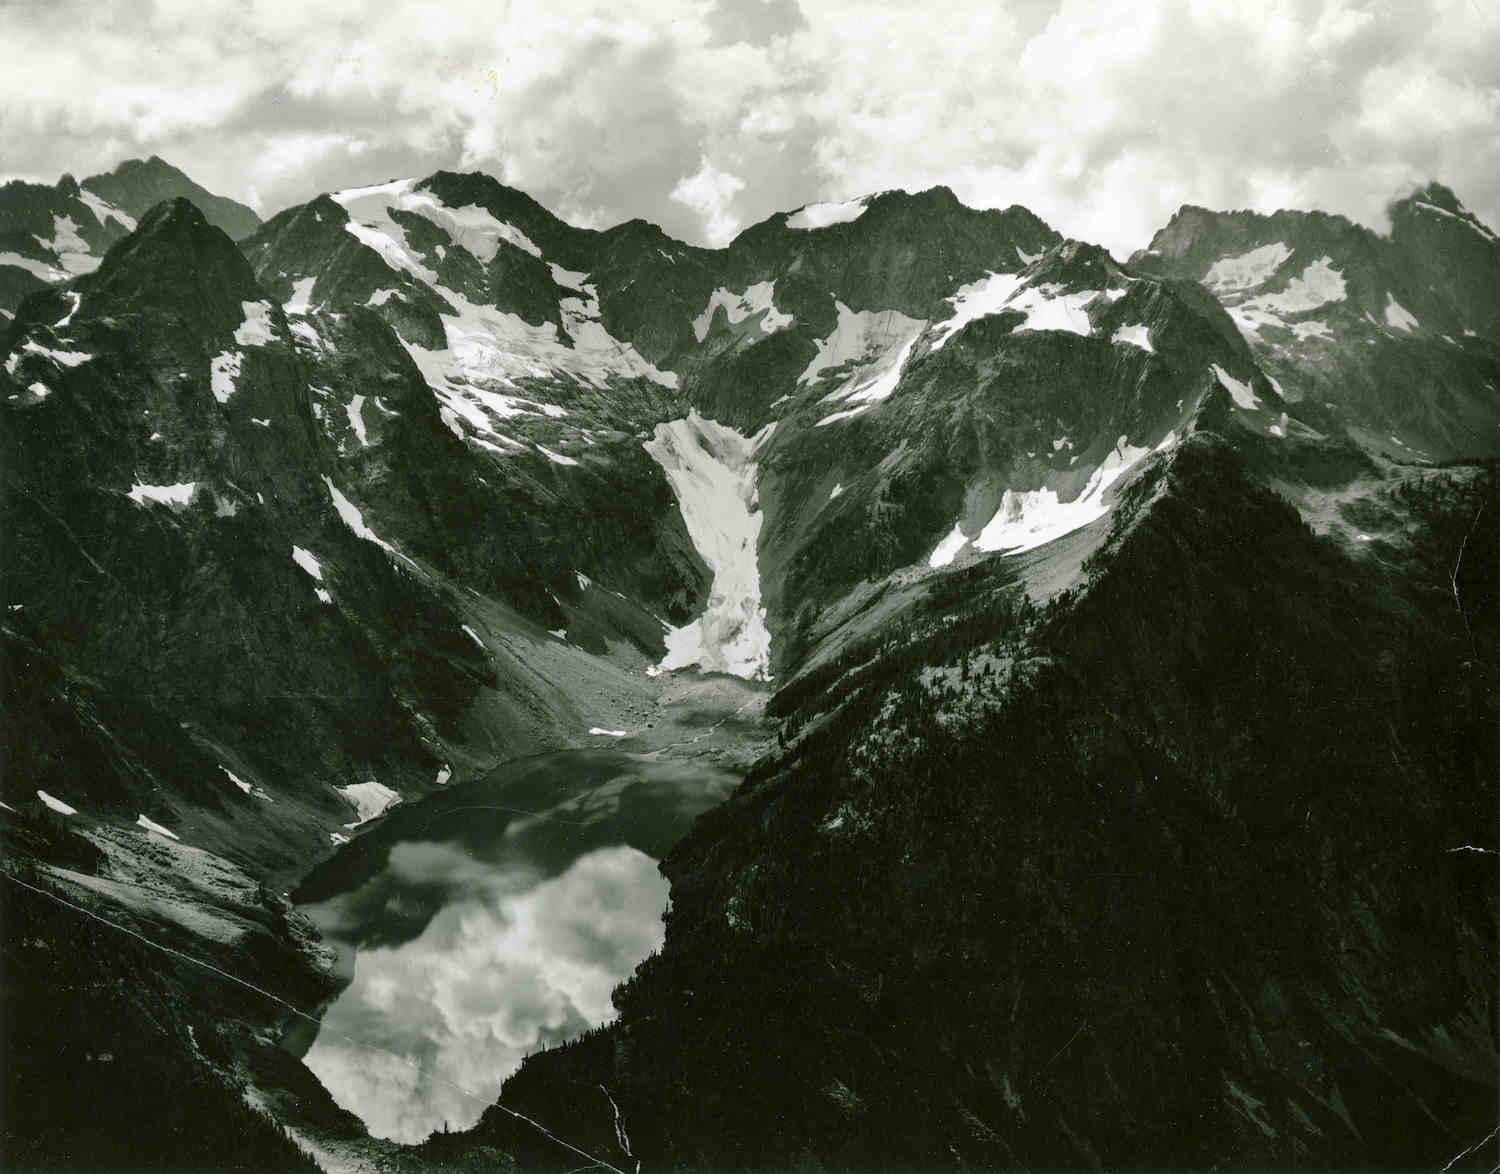 North Cascades National Park historic photo collections